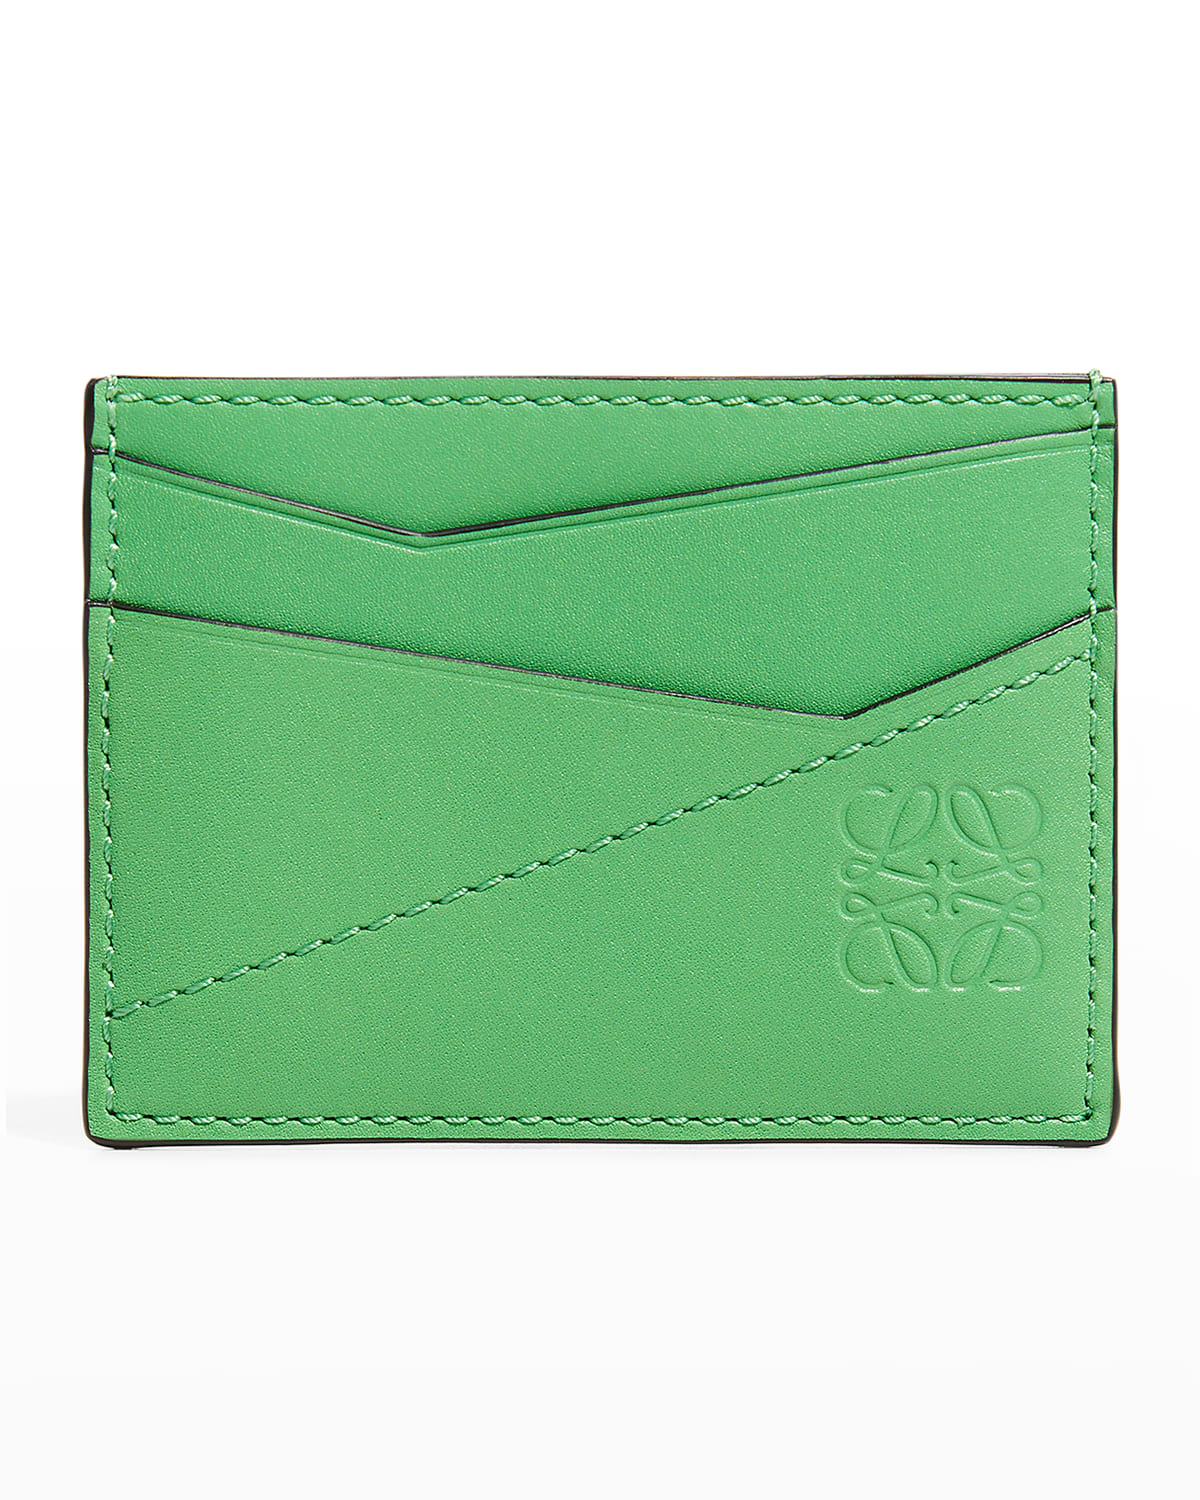 LOEWE MEN'S PUZZLE STITCHED LEATHER CARD CASE